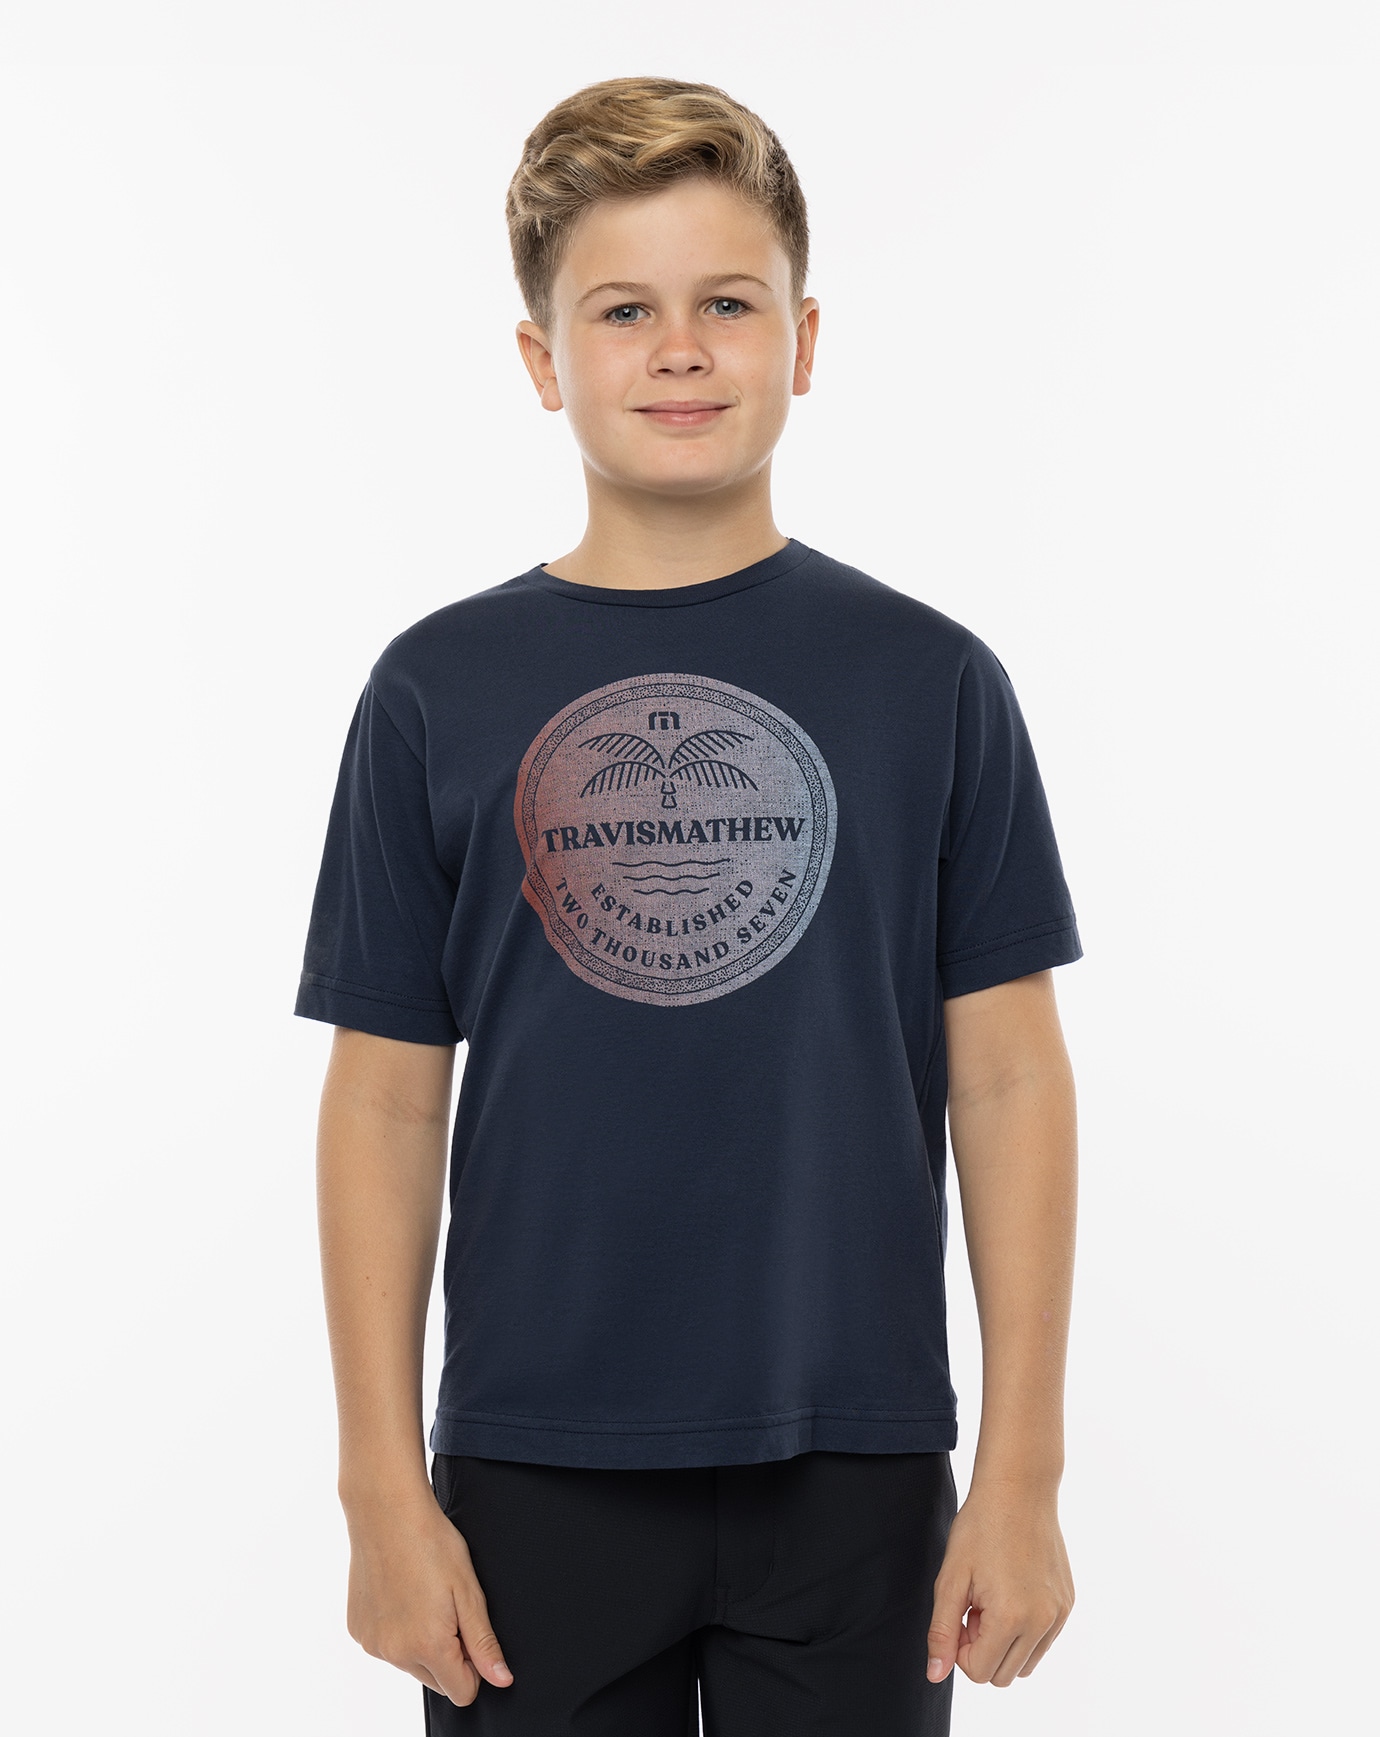 Related Product - CLIMATE ZONE YOUTH TEE